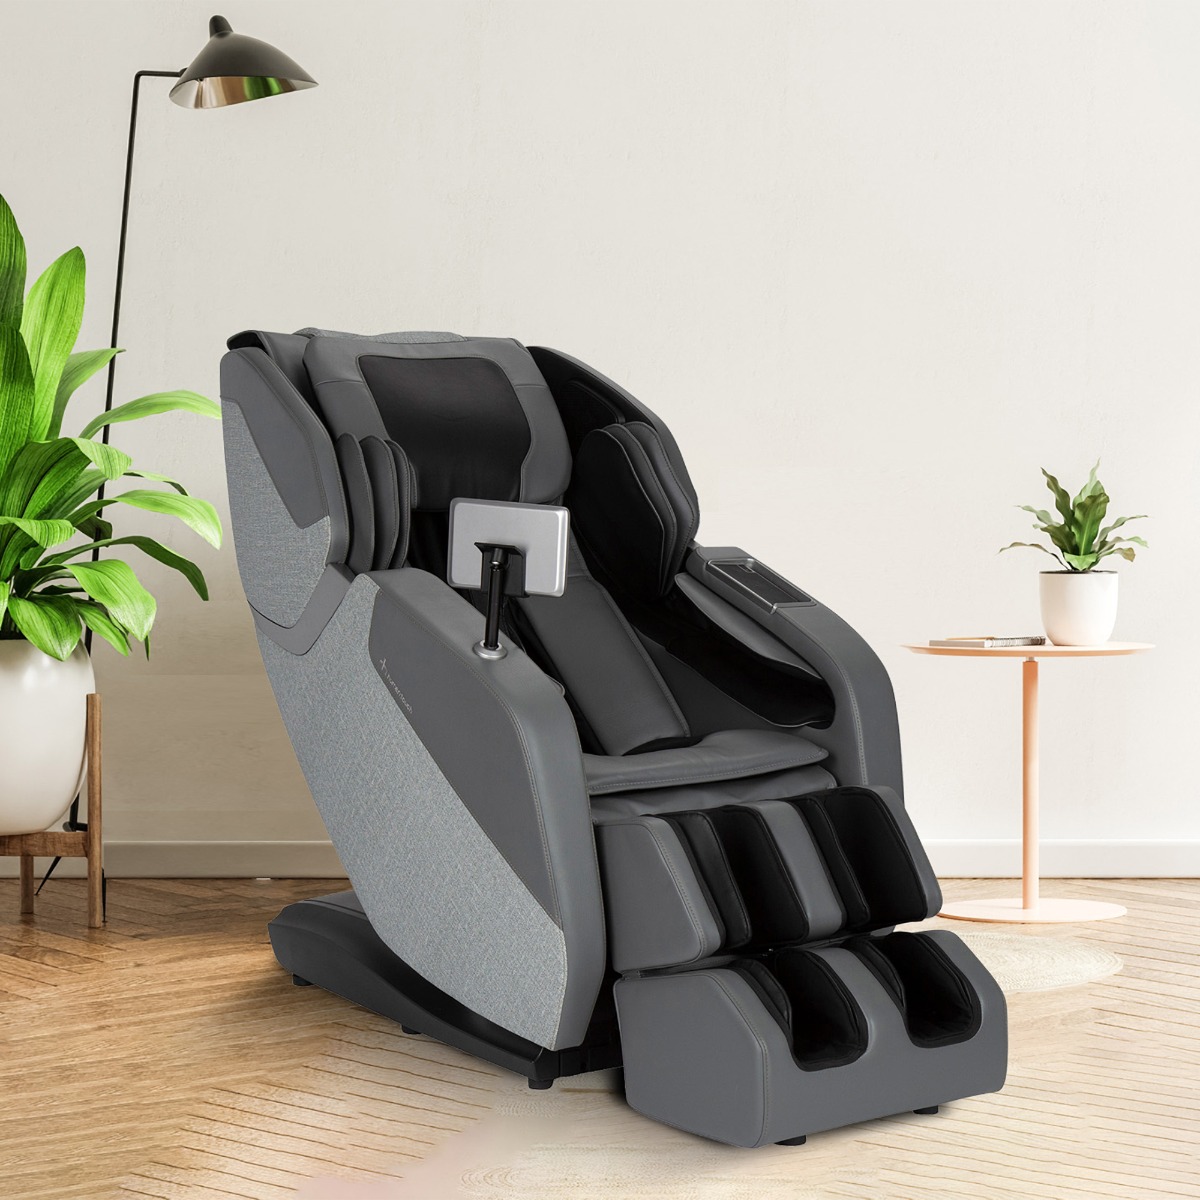 WholeBody ROVE Massage Chair